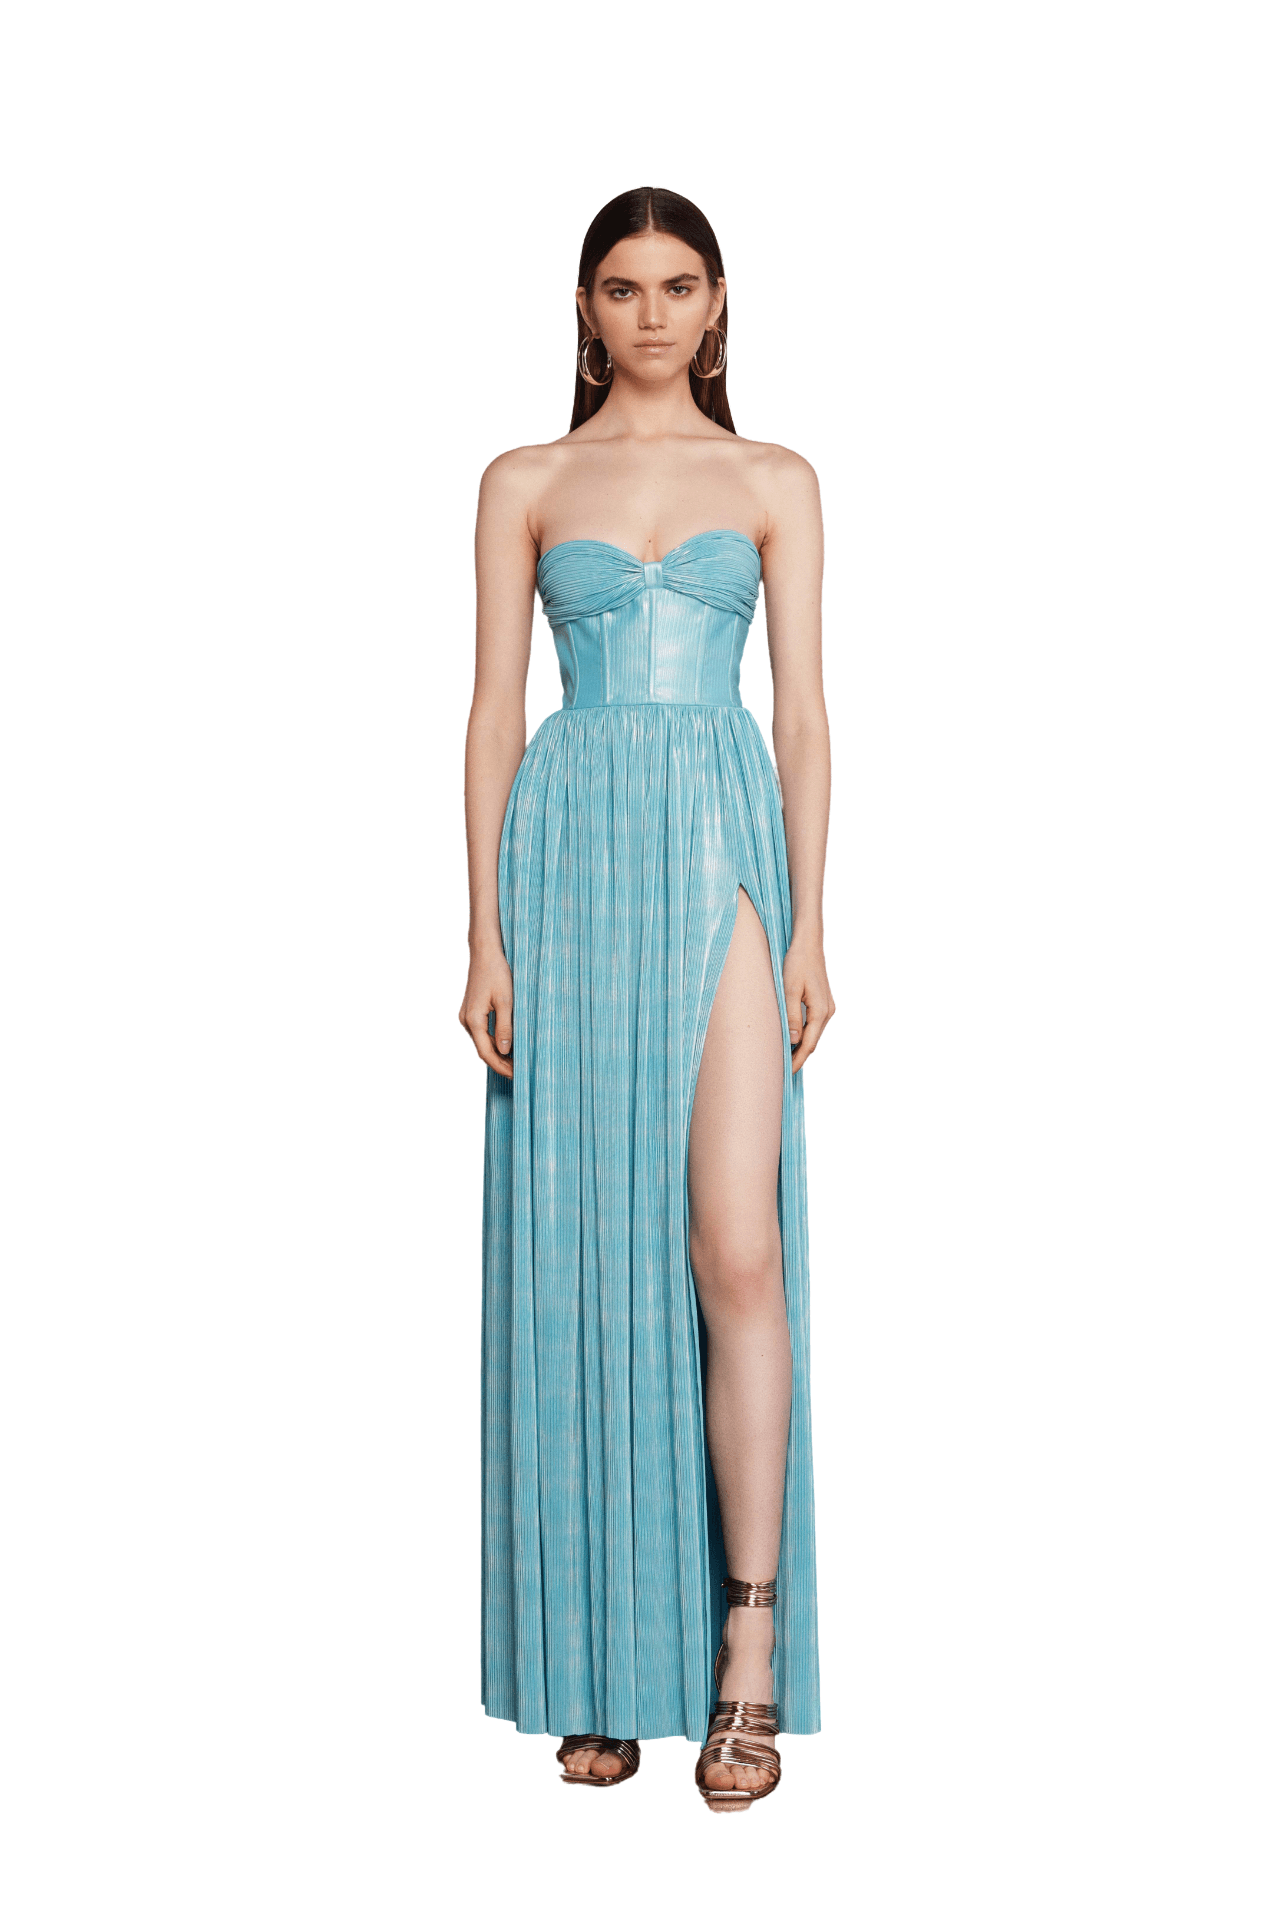 Florence Strapless Light Blue Gown